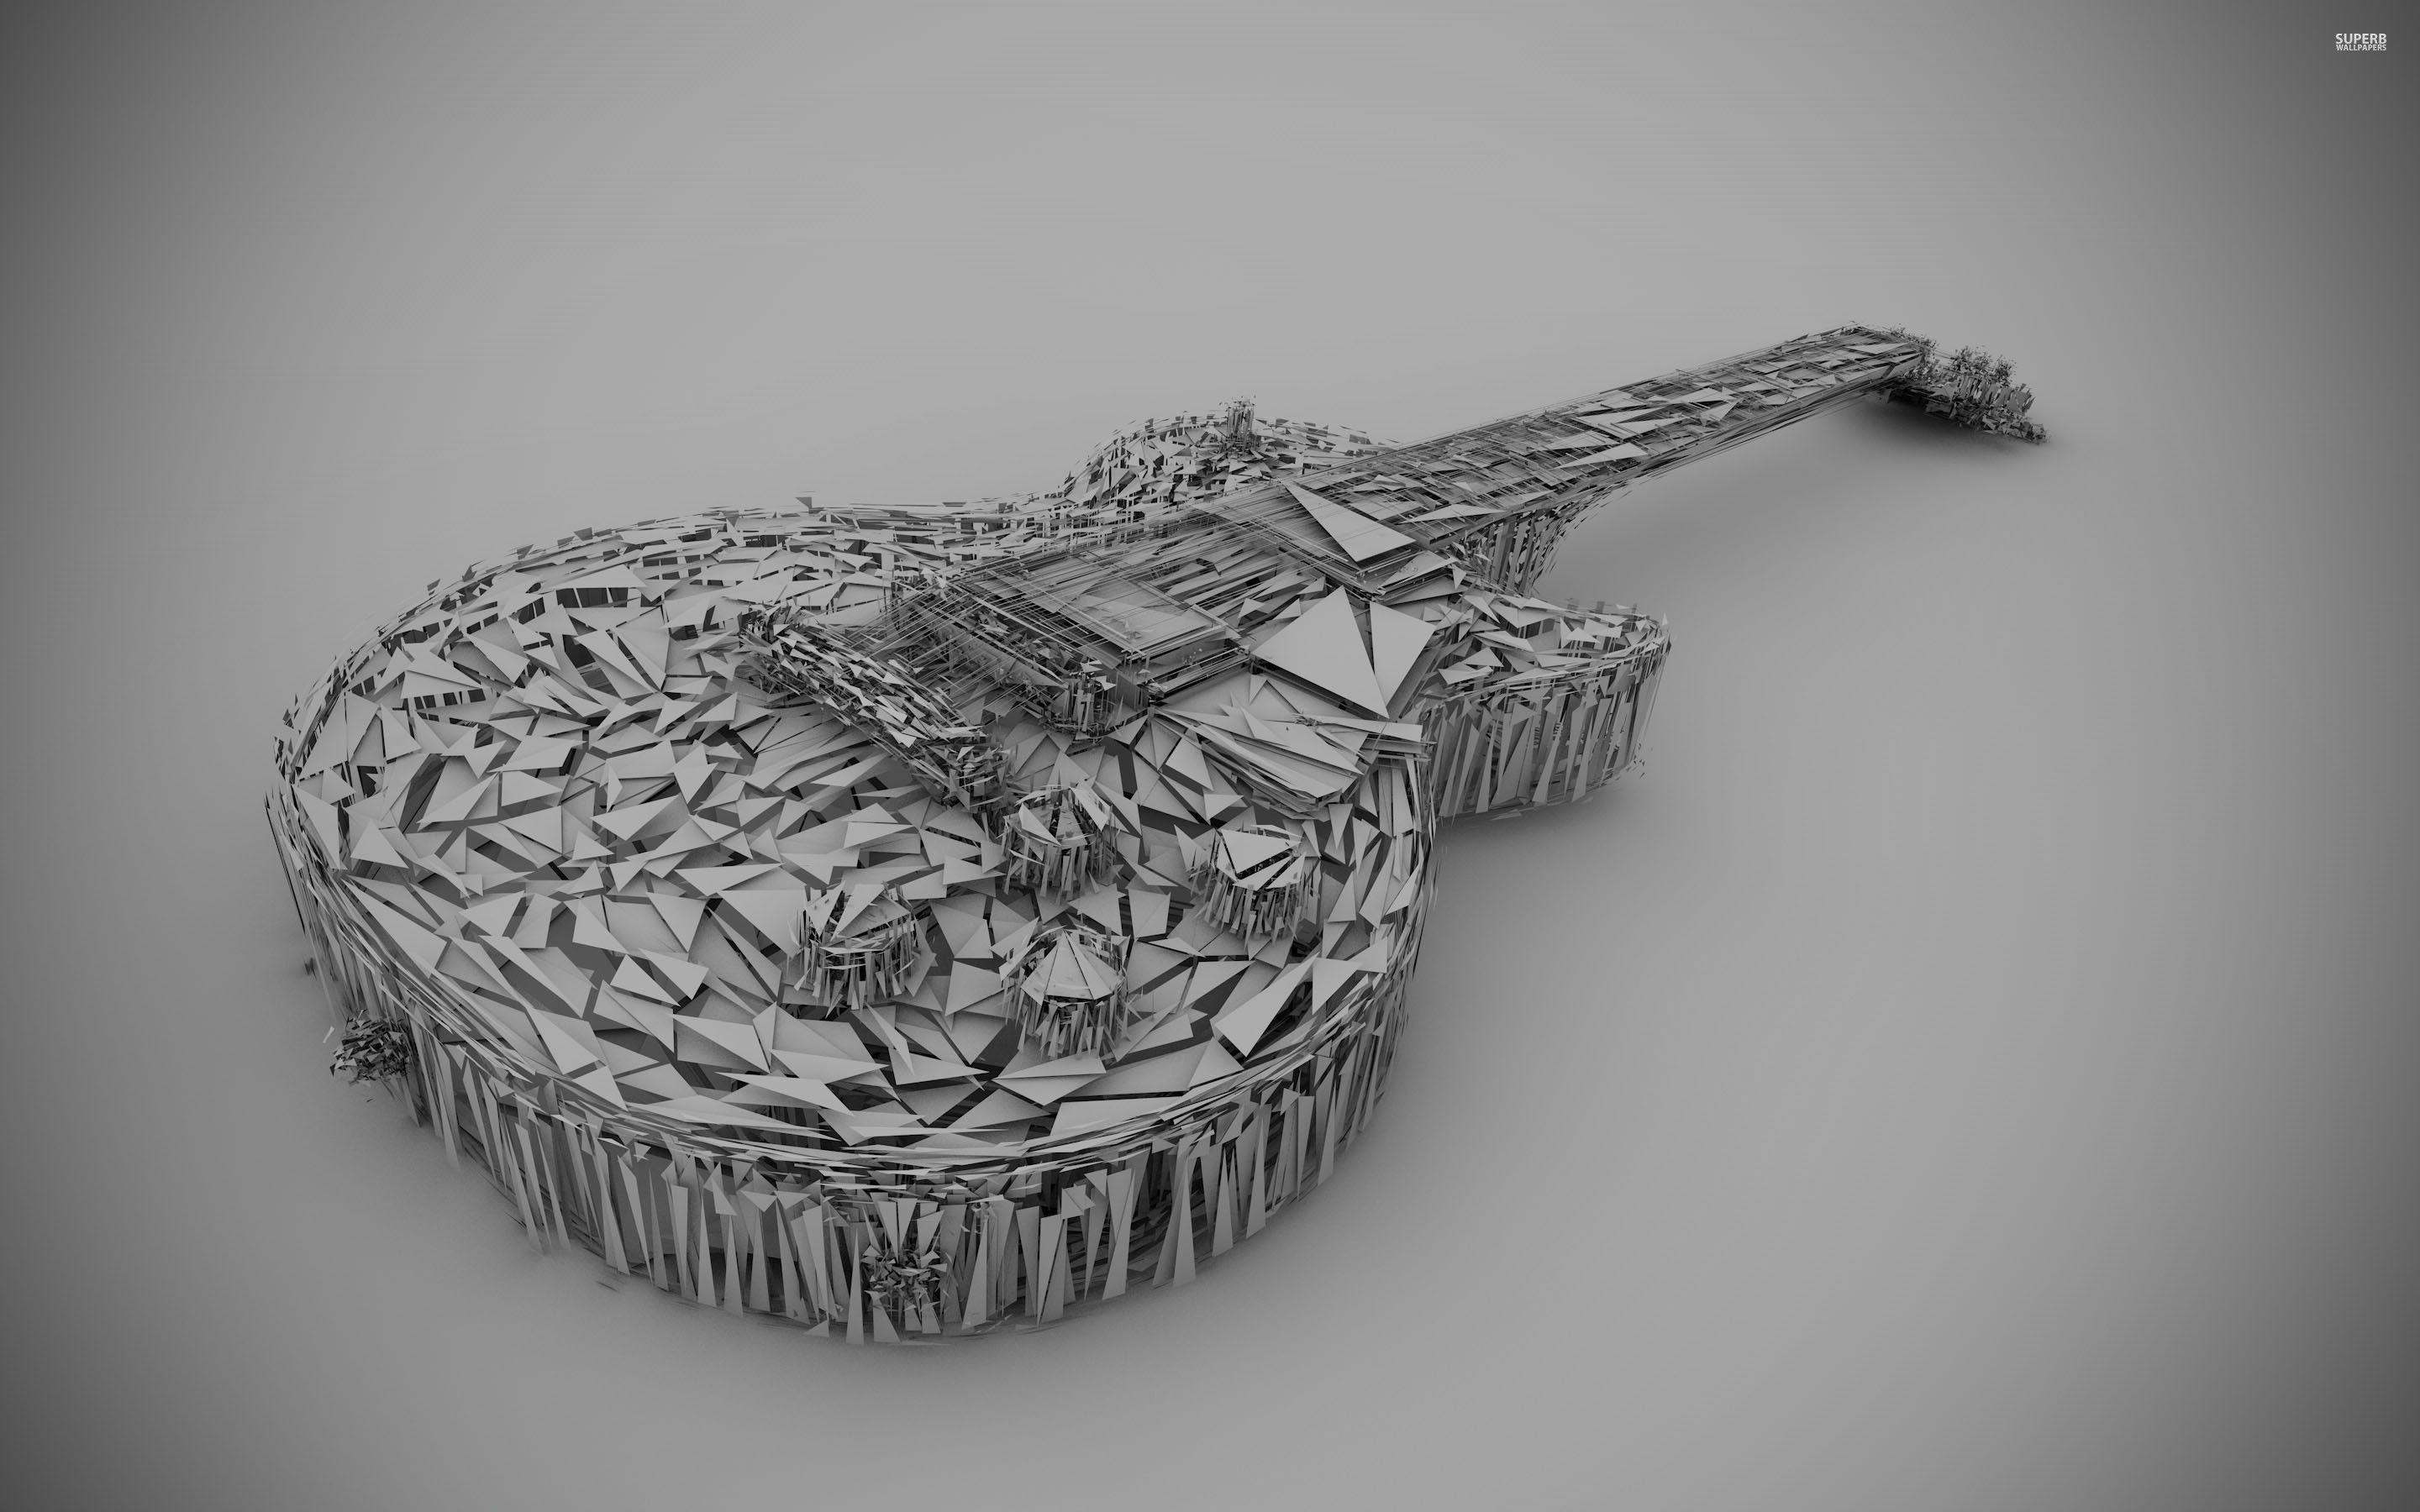 guitar-built-from-white-triangles-47360-2880x1800.jpg